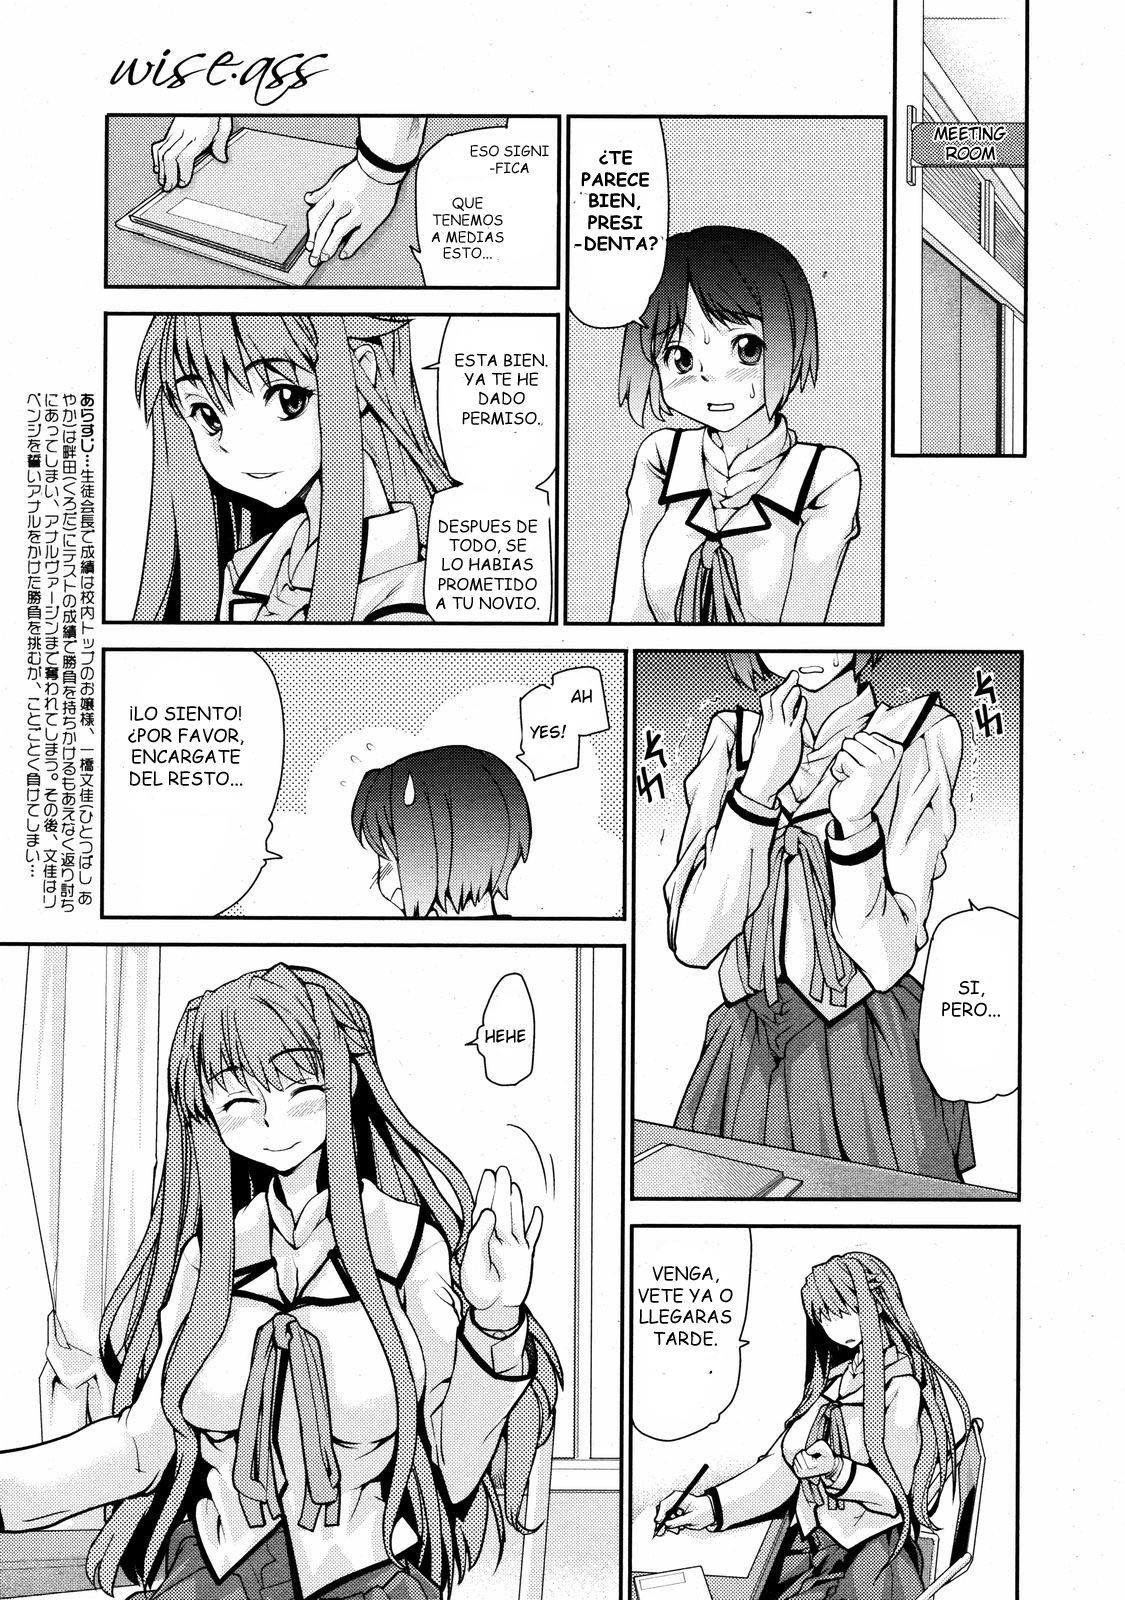 Wise Ass - Chapter 3 - 2